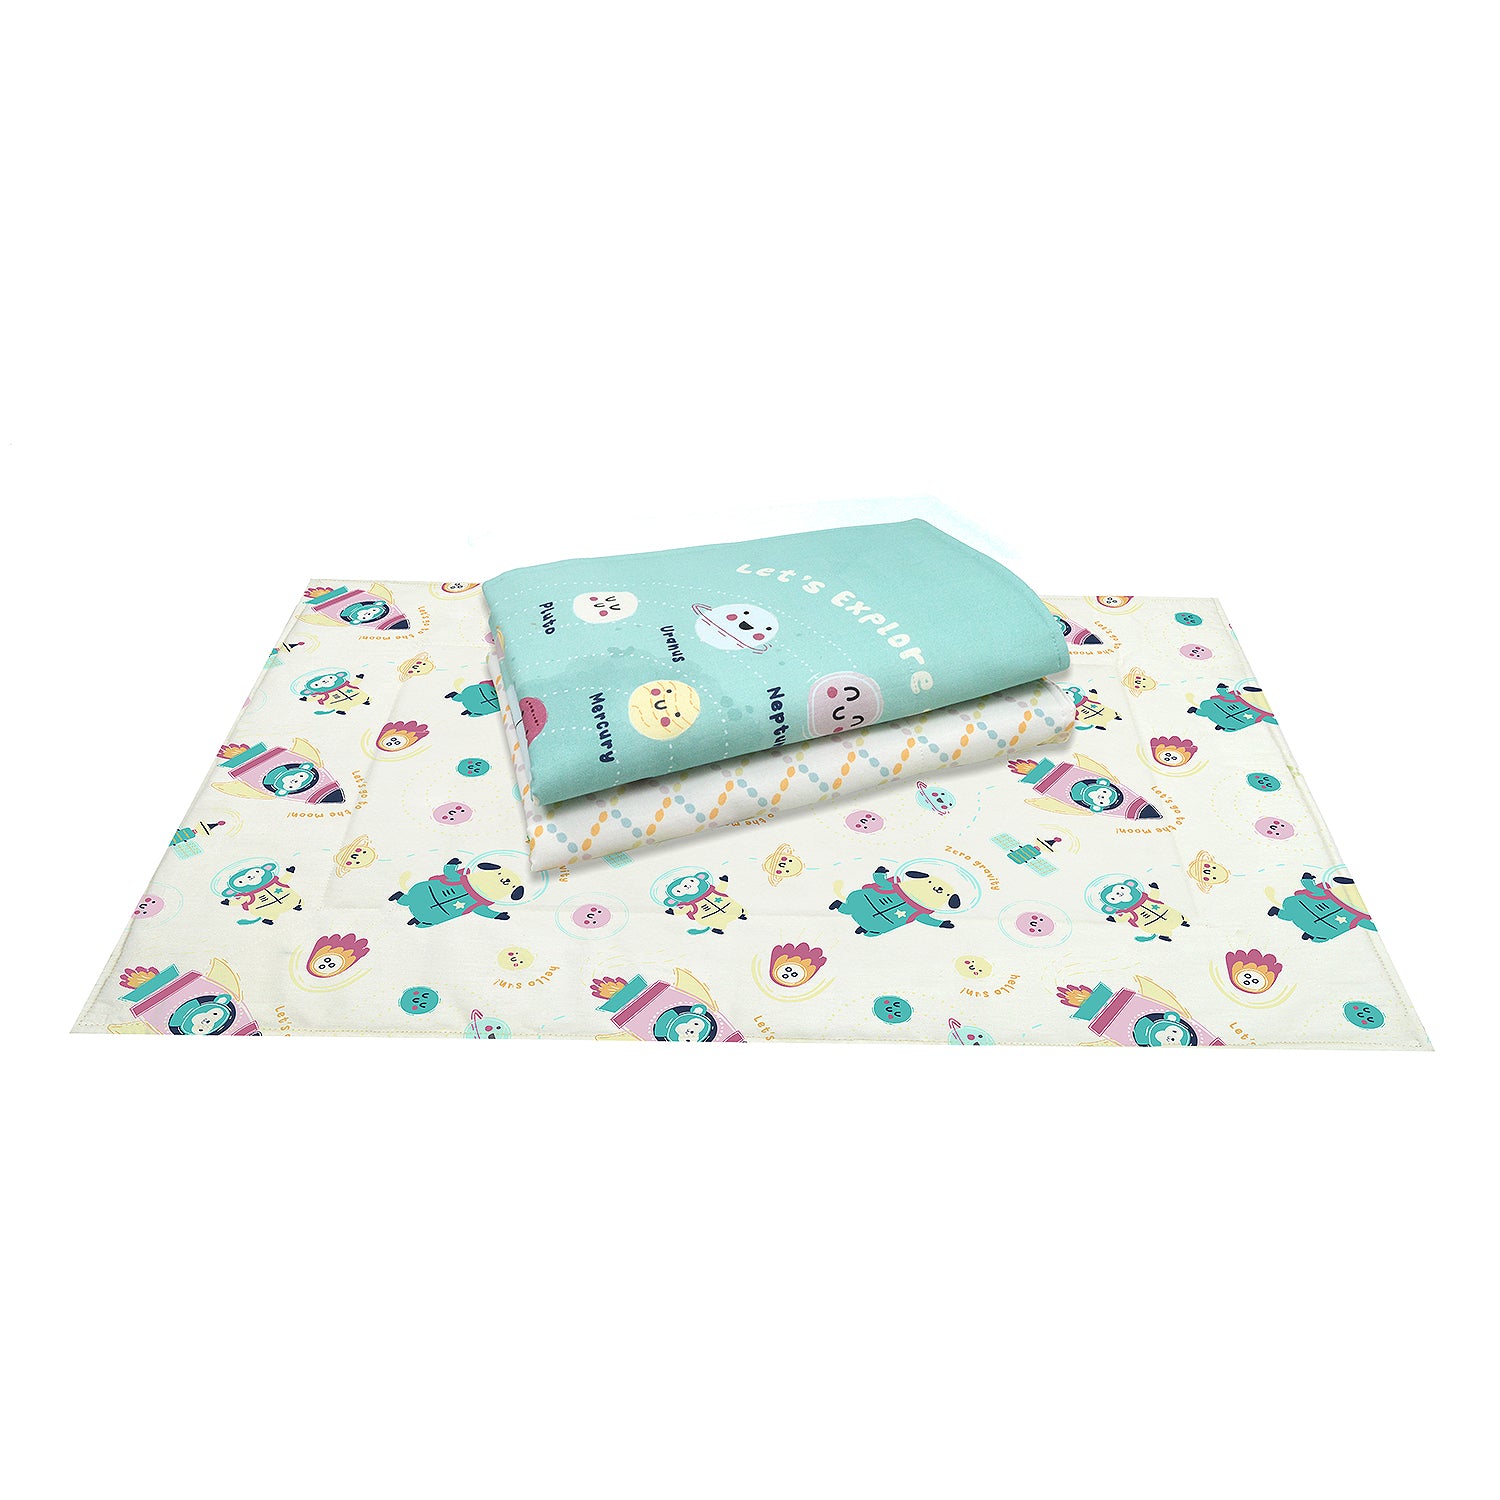 Our Mission Diaper Changing Mats For Baby Pack Of 3